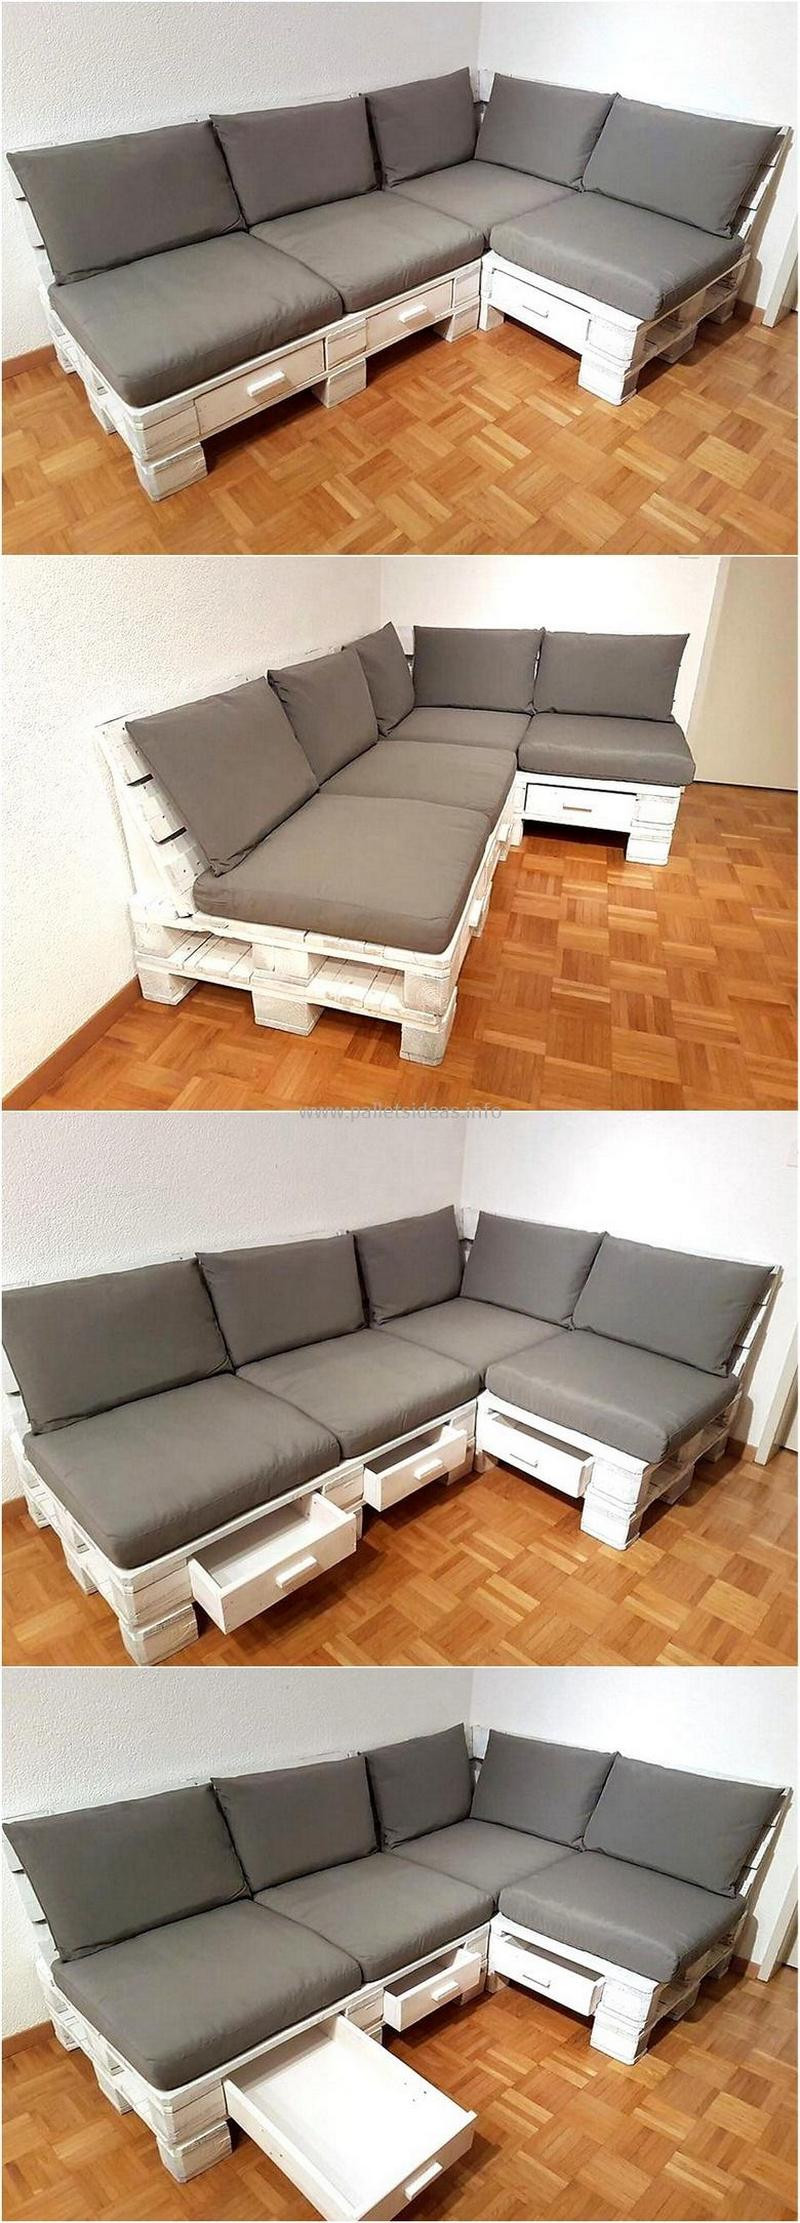 DIY Wood Couch
 60 DIY Ideas for Pallet Sofa and Couch